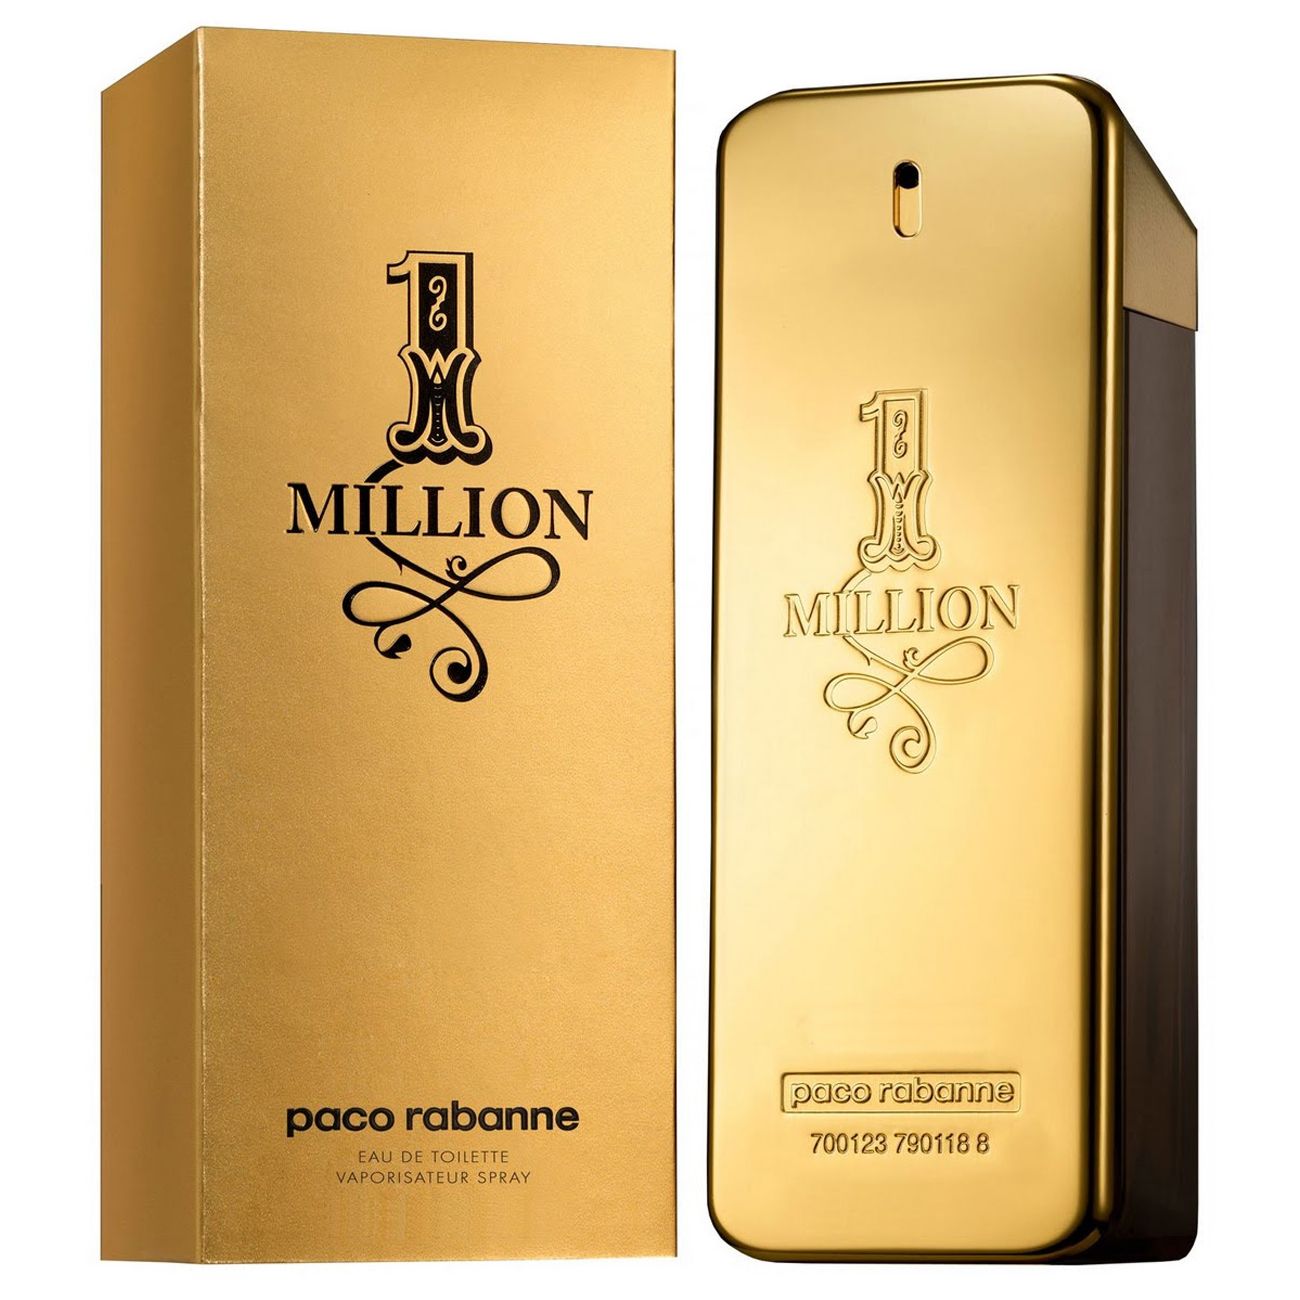 One Million Perfume in Canada stating 